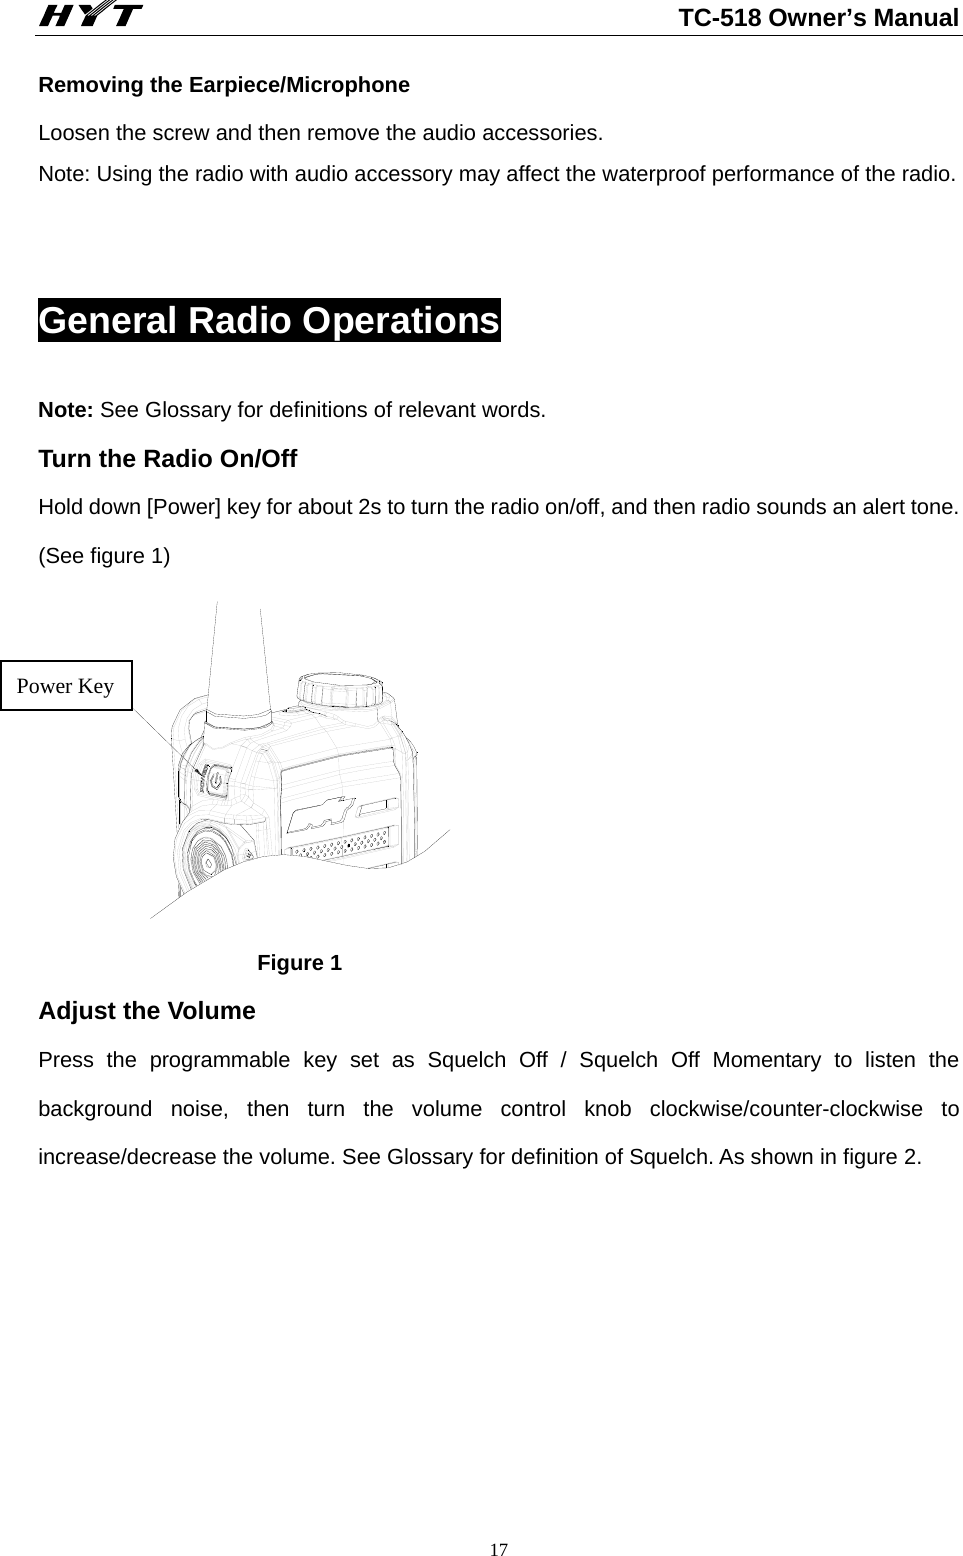                                                          TC-518 Owner’s Manual  17Removing the Earpiece/Microphone Loosen the screw and then remove the audio accessories.     Note: Using the radio with audio accessory may affect the waterproof performance of the radio.  General Radio Operations Note: See Glossary for definitions of relevant words.         Turn the Radio On/Off Hold down [Power] key for about 2s to turn the radio on/off, and then radio sounds an alert tone. (See figure 1) POWER按键                     Figure 1 Adjust the Volume       Press the programmable key set as Squelch Off / Squelch Off Momentary to listen the background noise, then turn the volume control knob clockwise/counter-clockwise to increase/decrease the volume. See Glossary for definition of Squelch. As shown in figure 2.    Power Key 